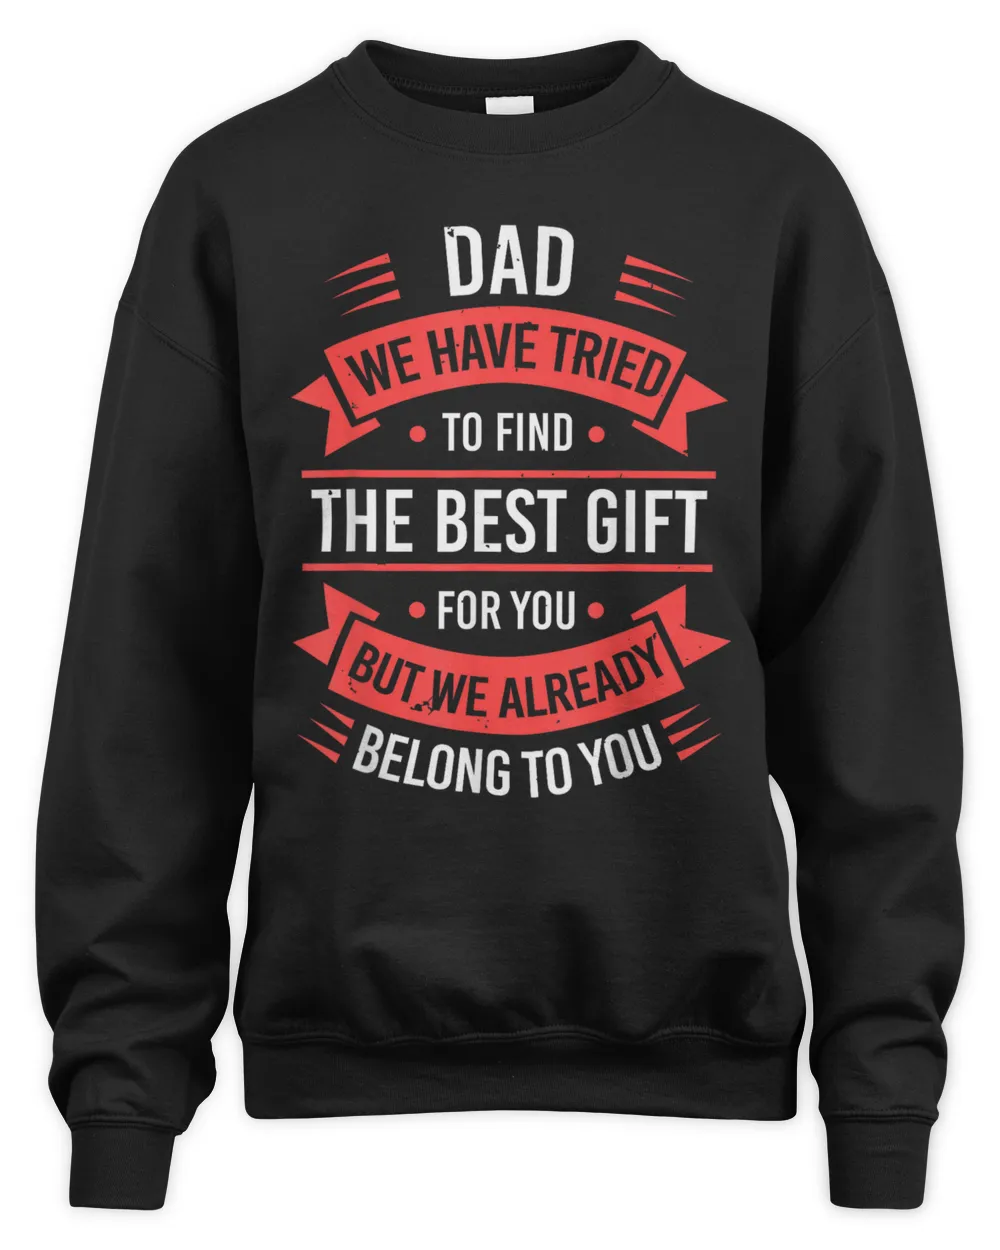 Funny Fathers Day Shirt For Dad From Daughters Fathers Day T-Shirt